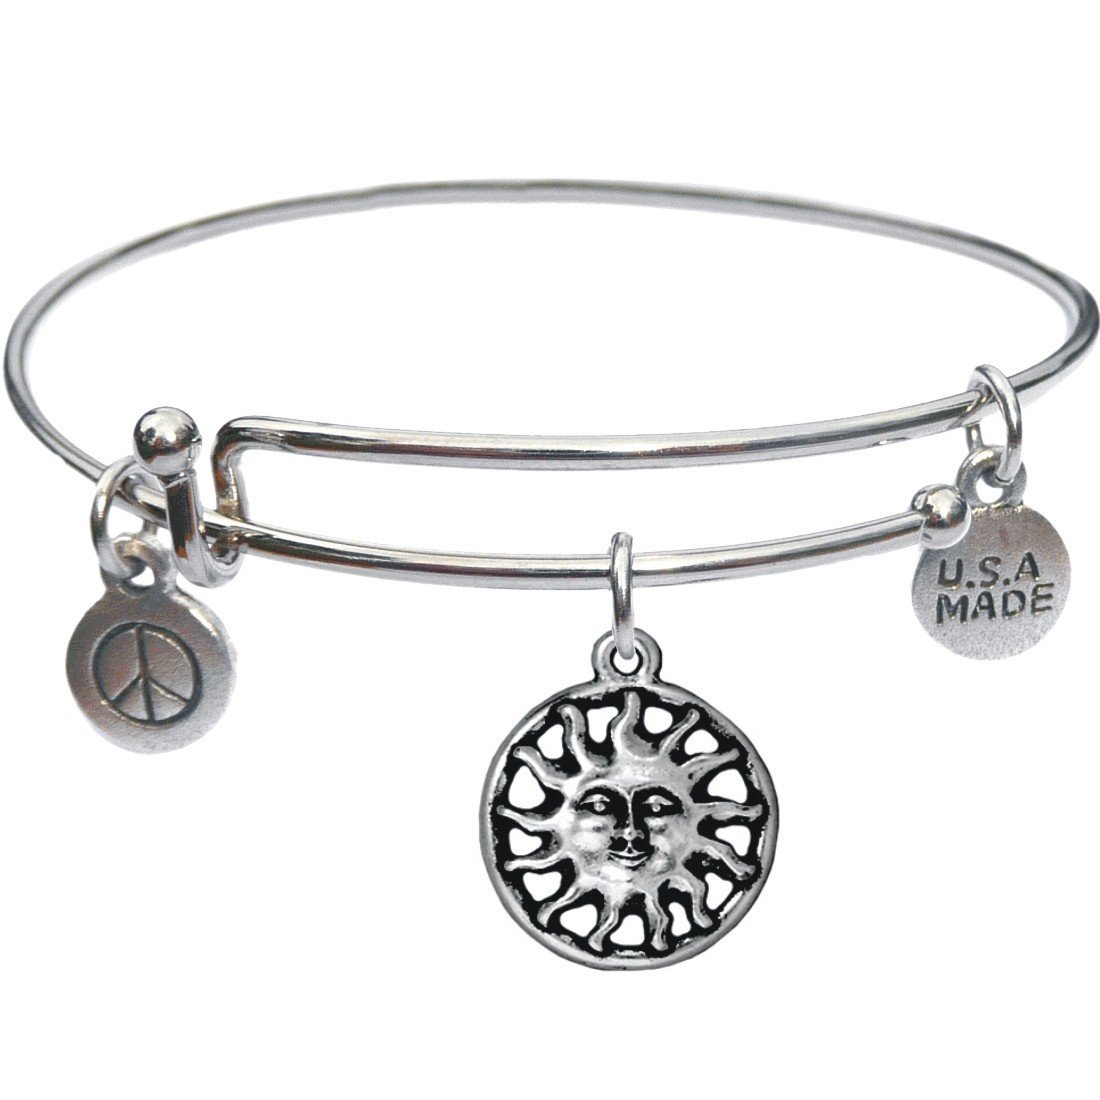 Primary image for Bangle Bracelet and Sun Charm